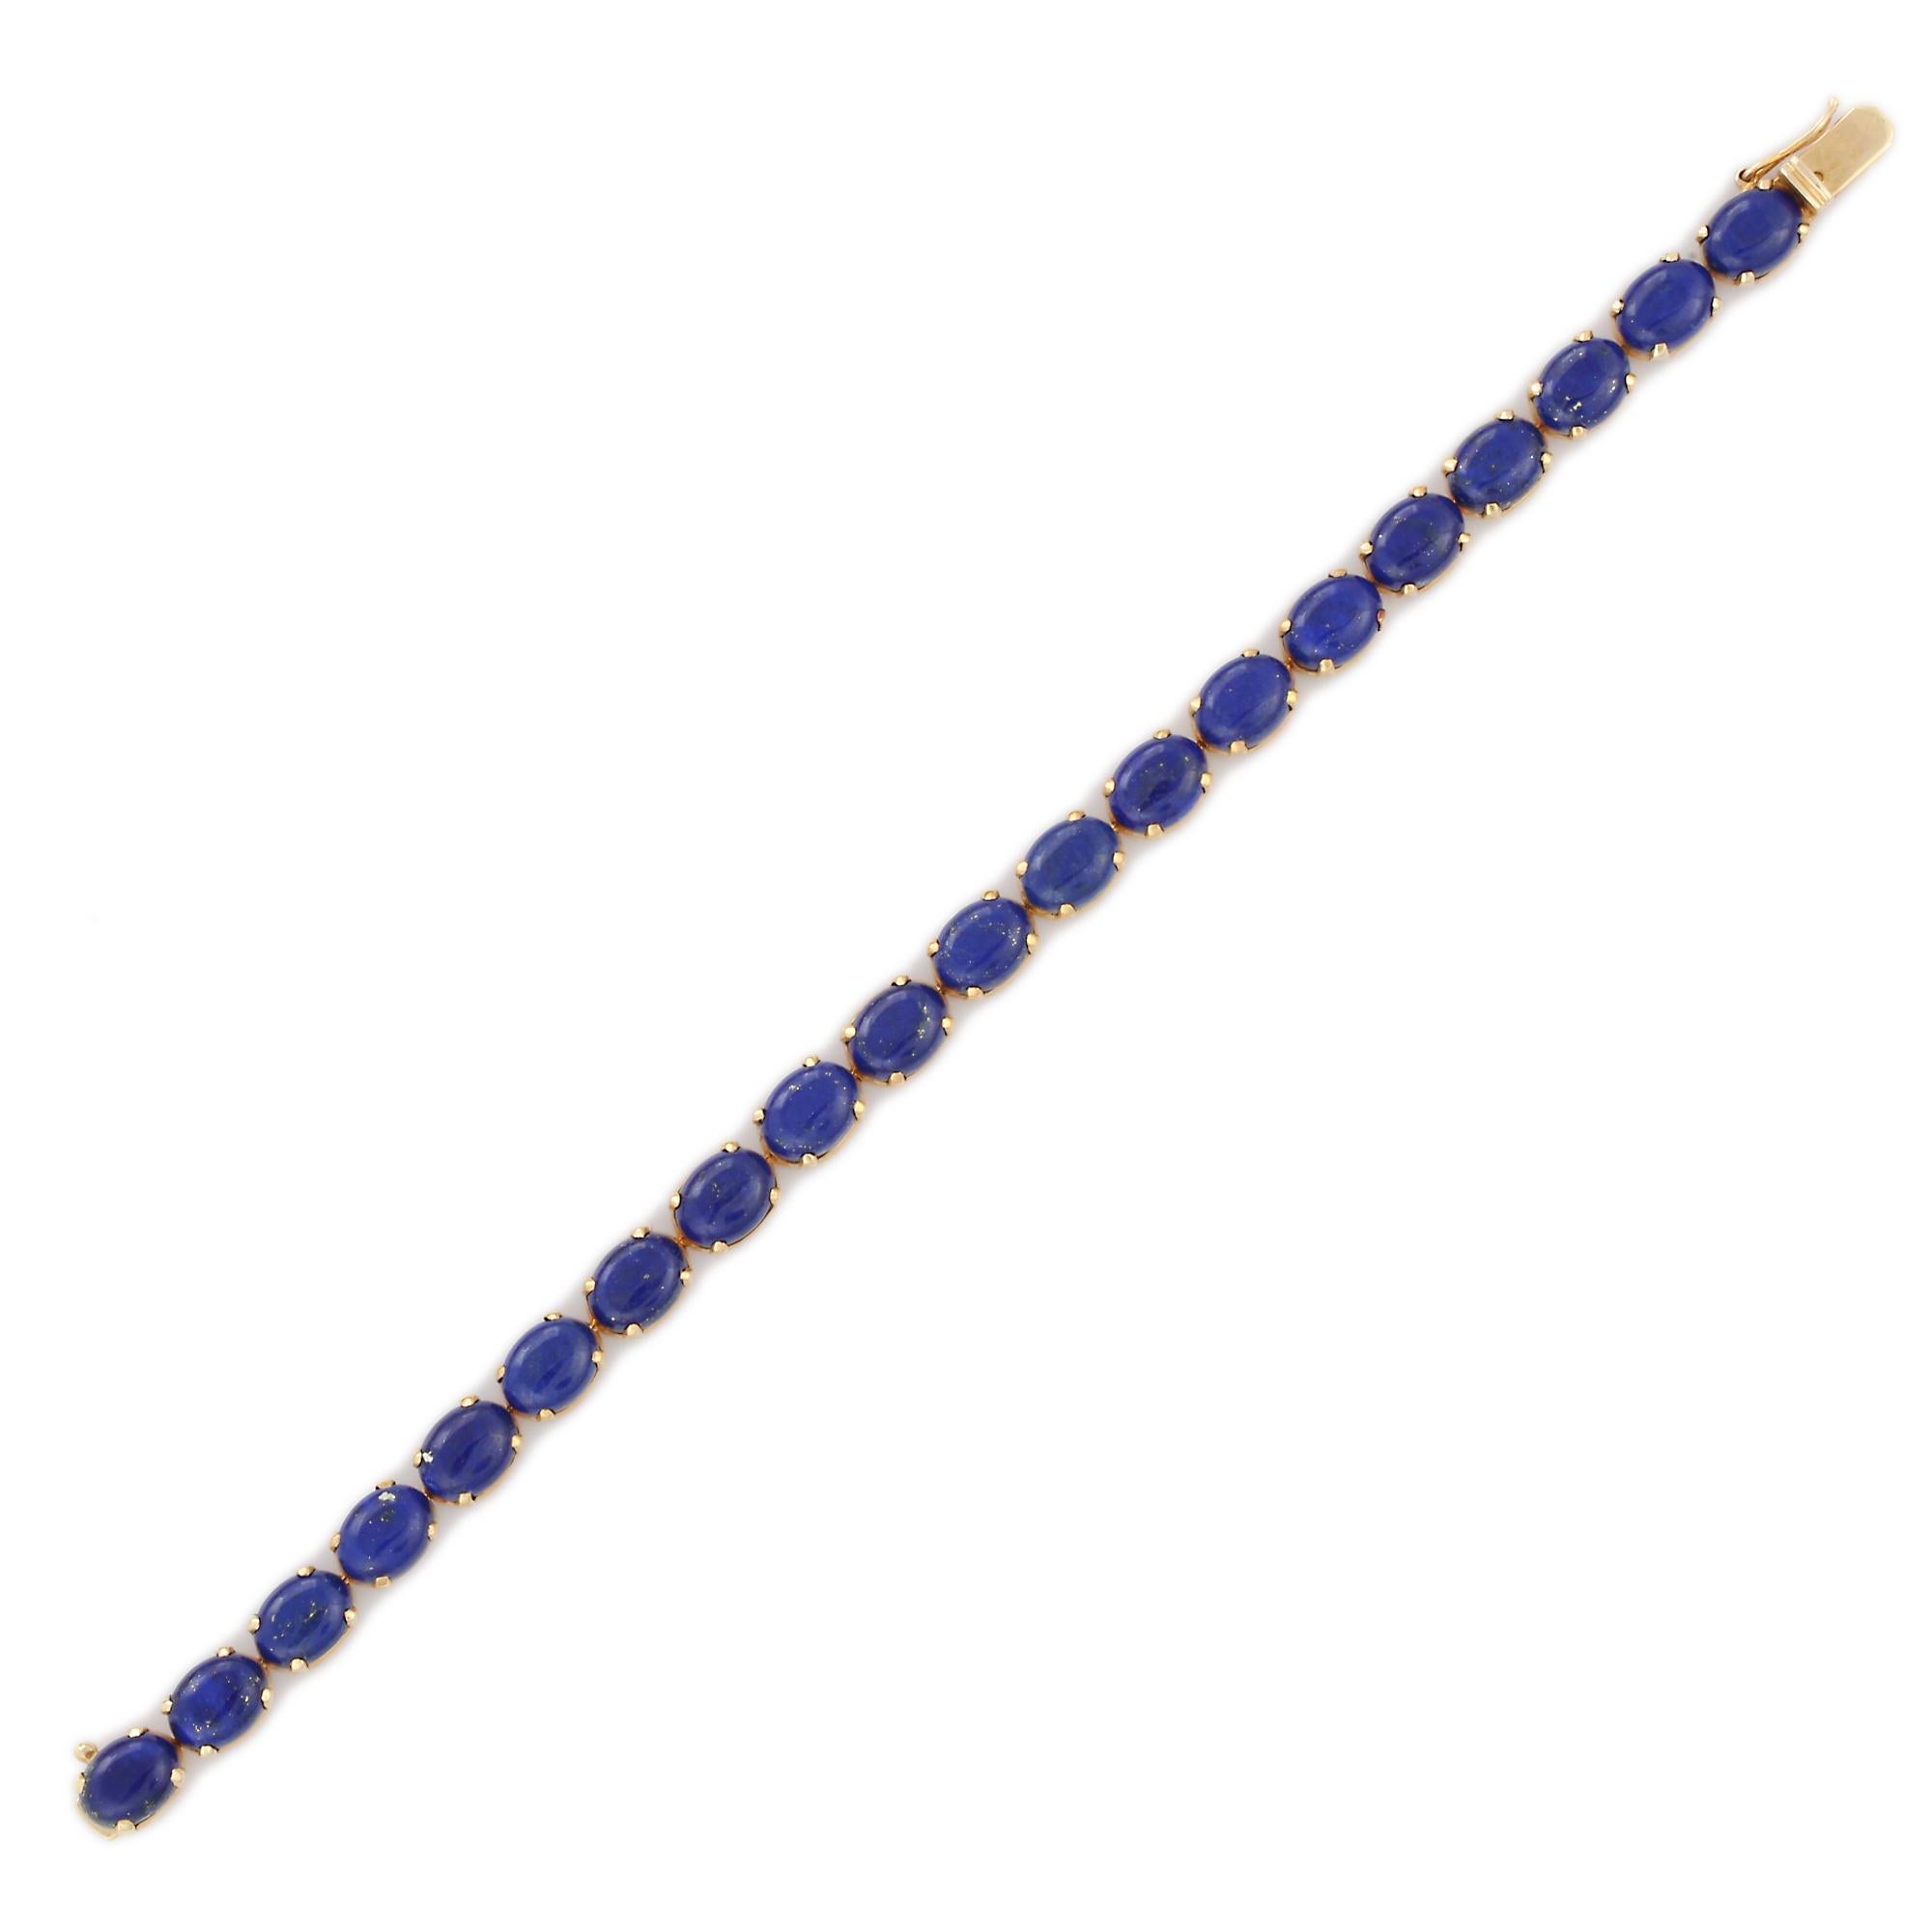 Oval Cut Vintage Prong Setting 33.35 Ct Lapis Lazuli Tennis Bracelet in 14K Yellow Gold For Sale